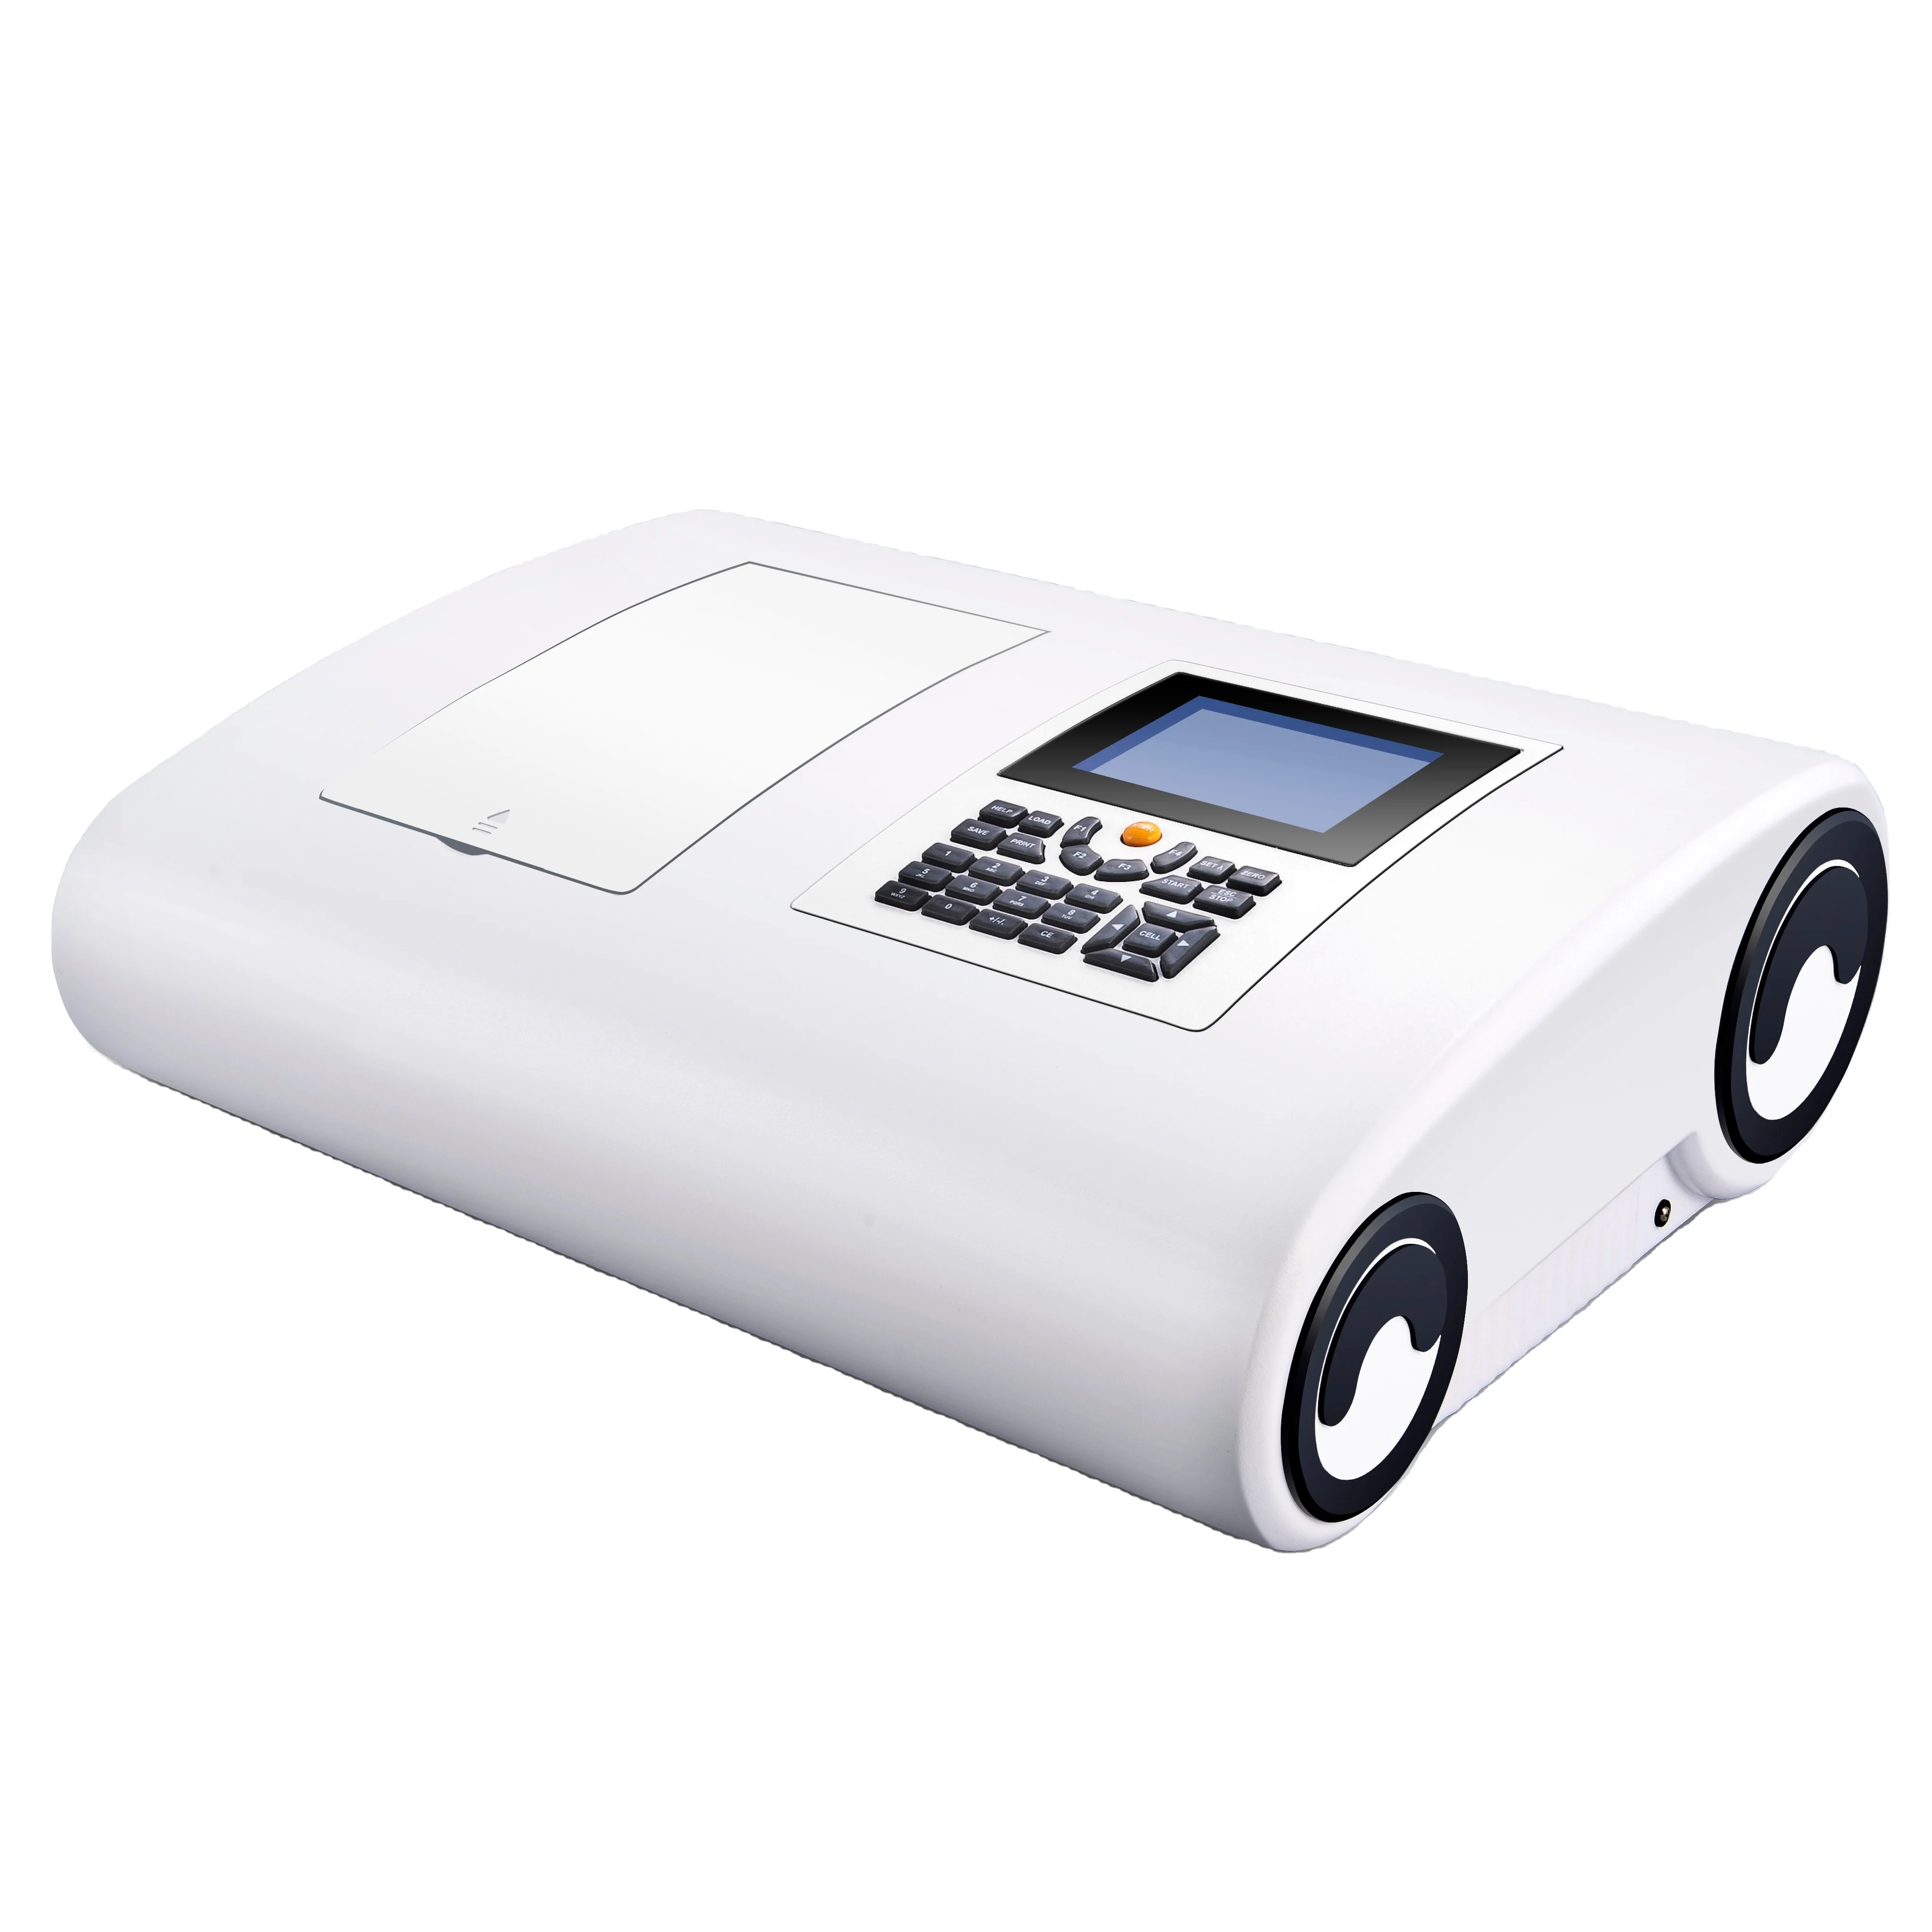 UV 9000 dual beam uv visible spectrophotometer with LCD screen (1600231758349)